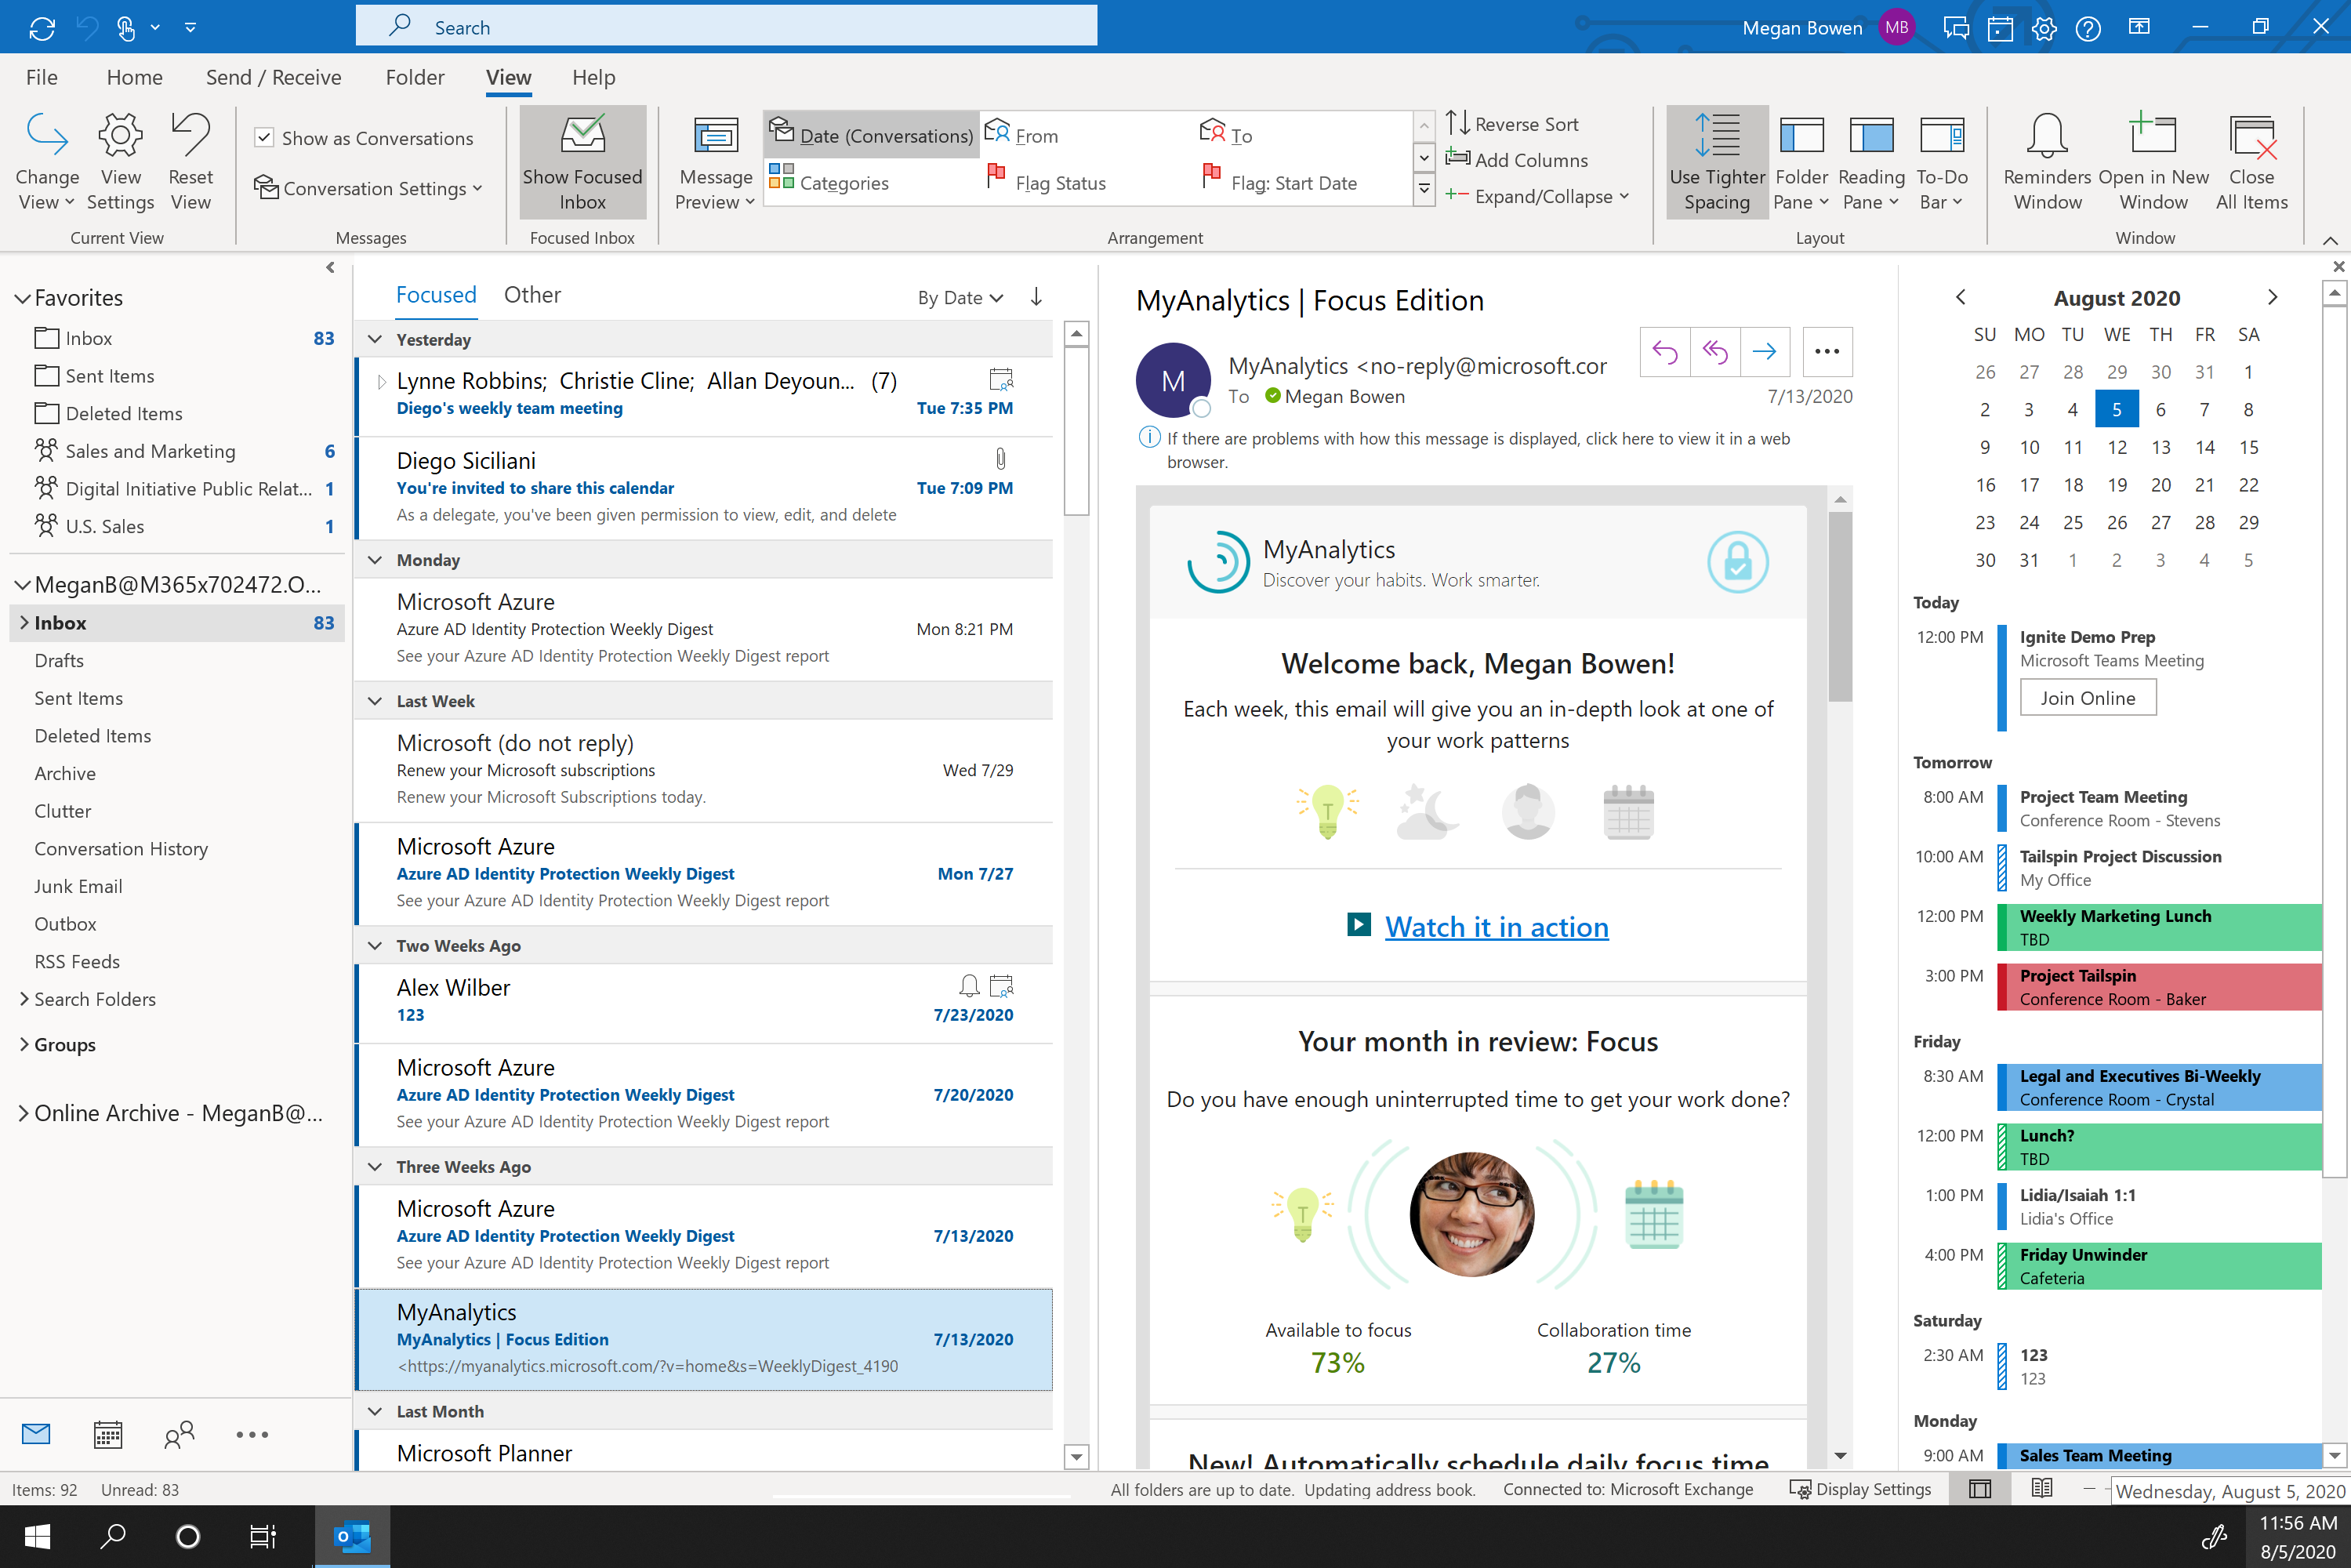 Join online button in Outlook.